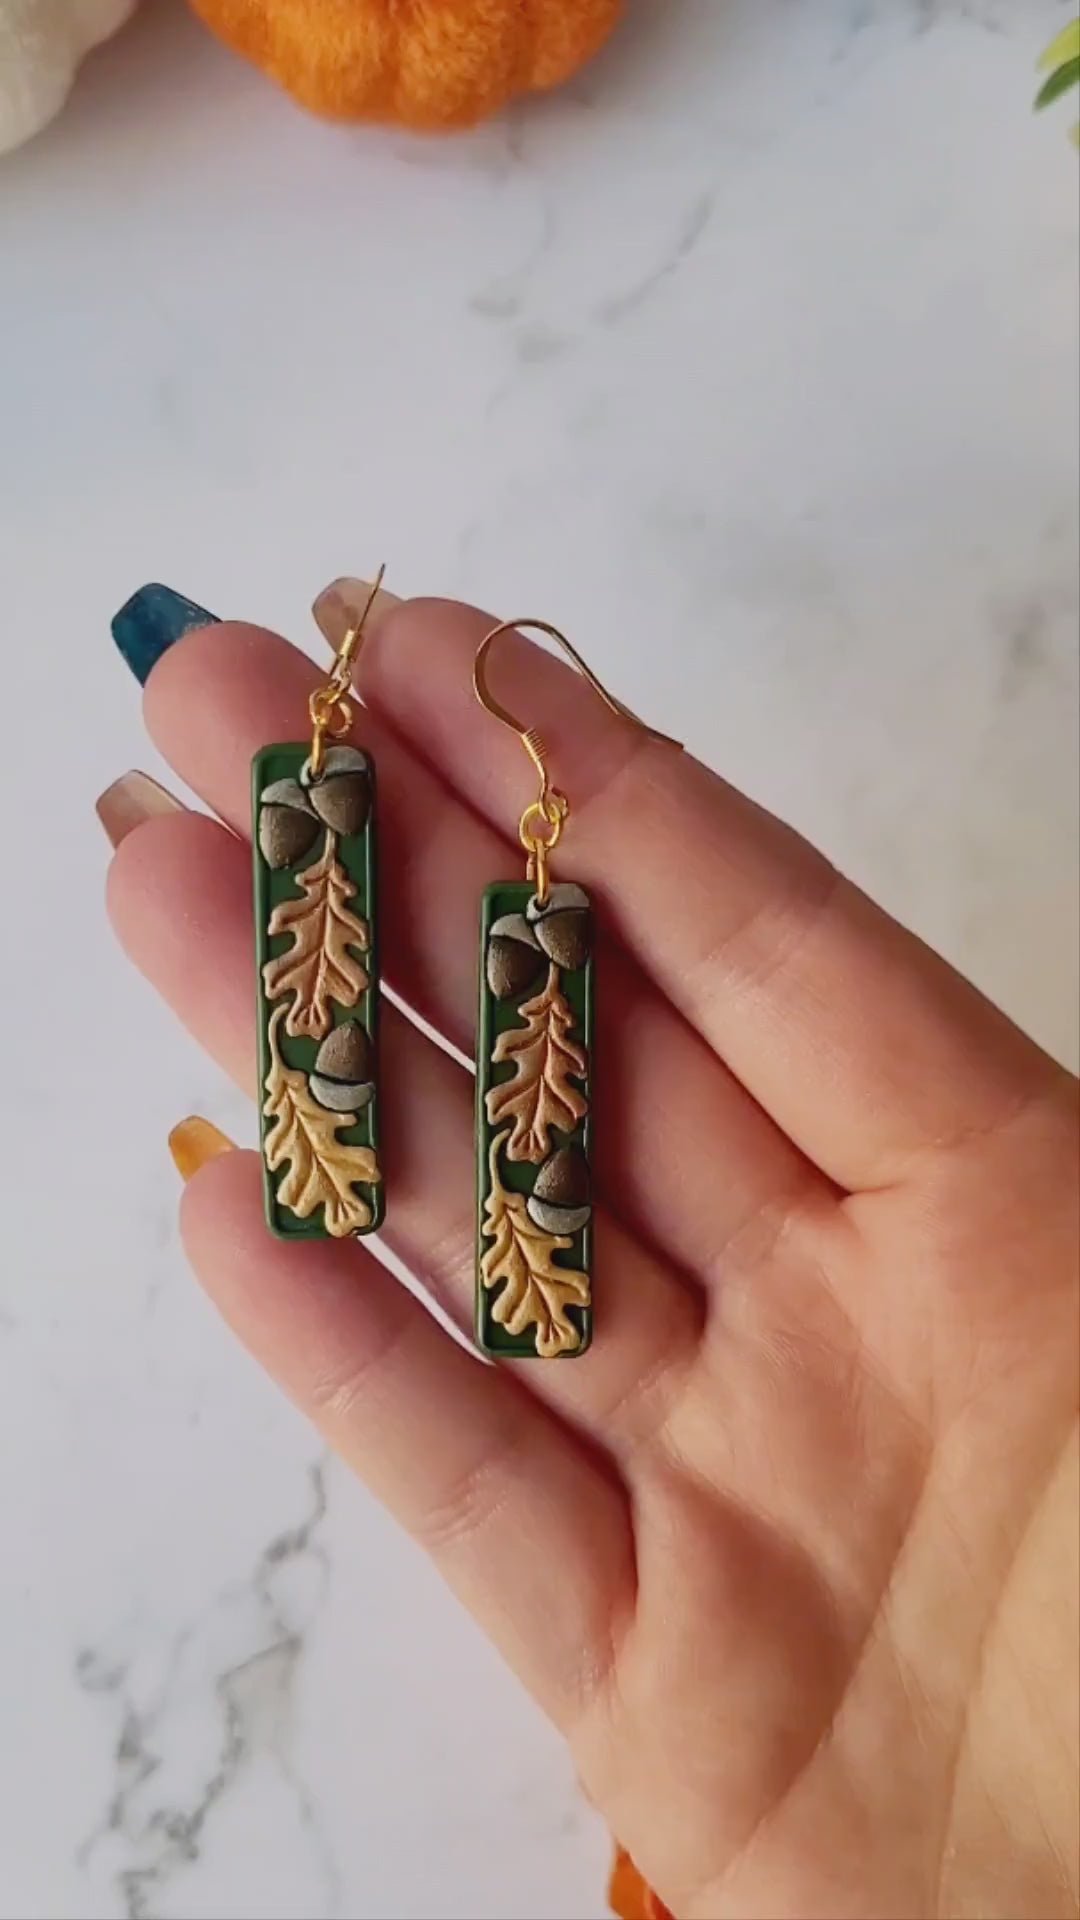 video close up of the Green bar shaped earrings with metallic acorns and oak leaves.